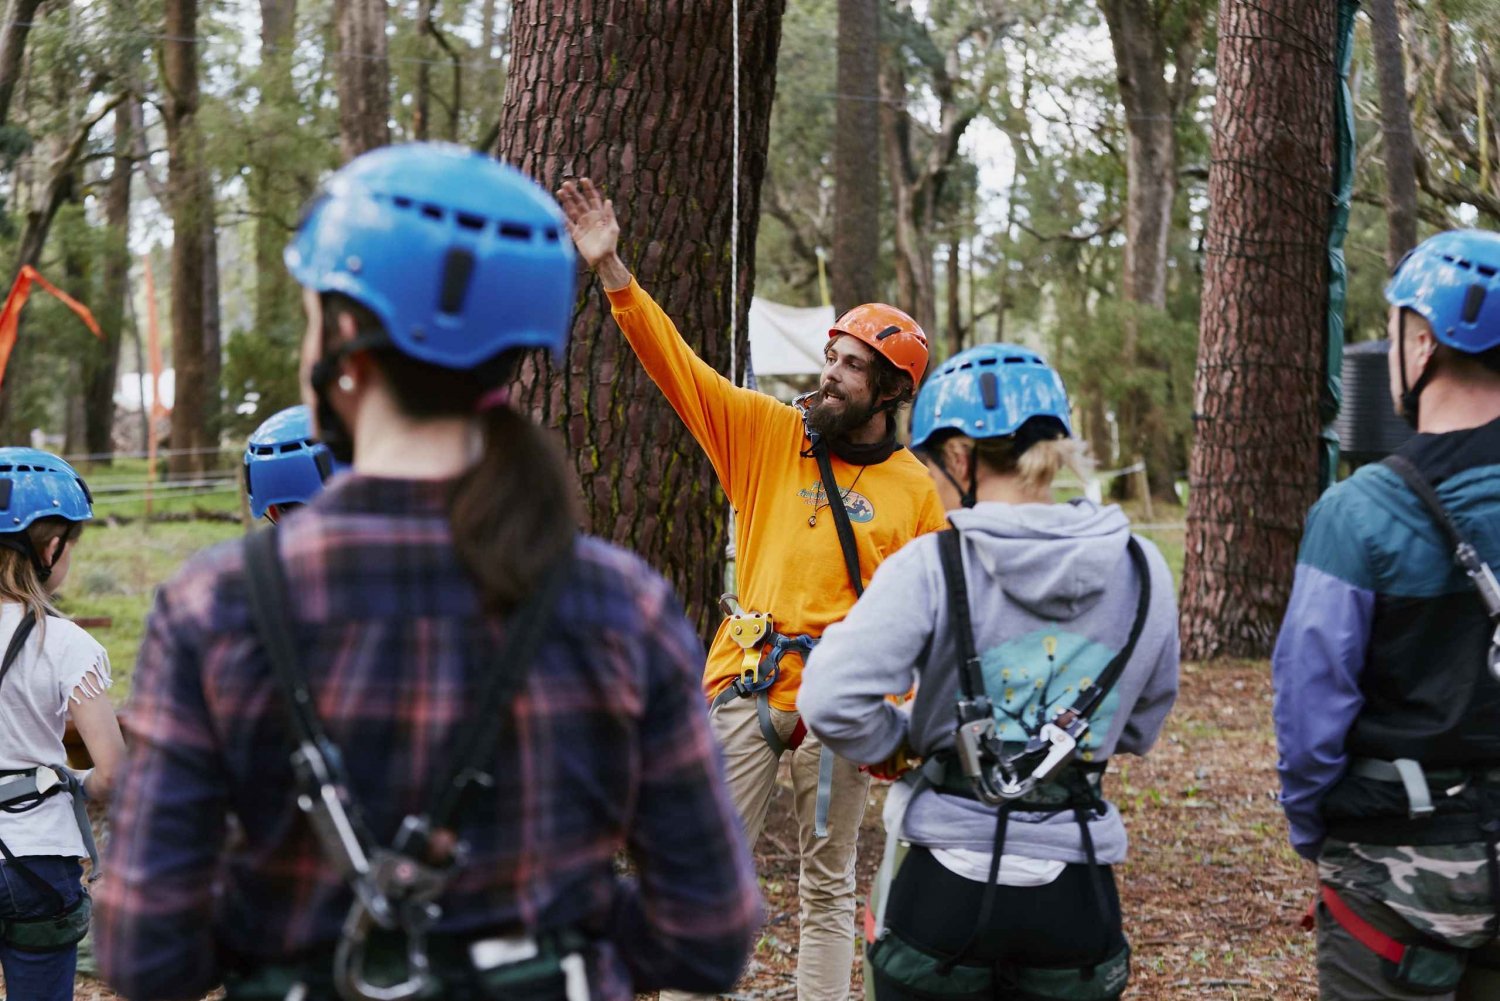 Busselton: 2-Hour High Ropes Course